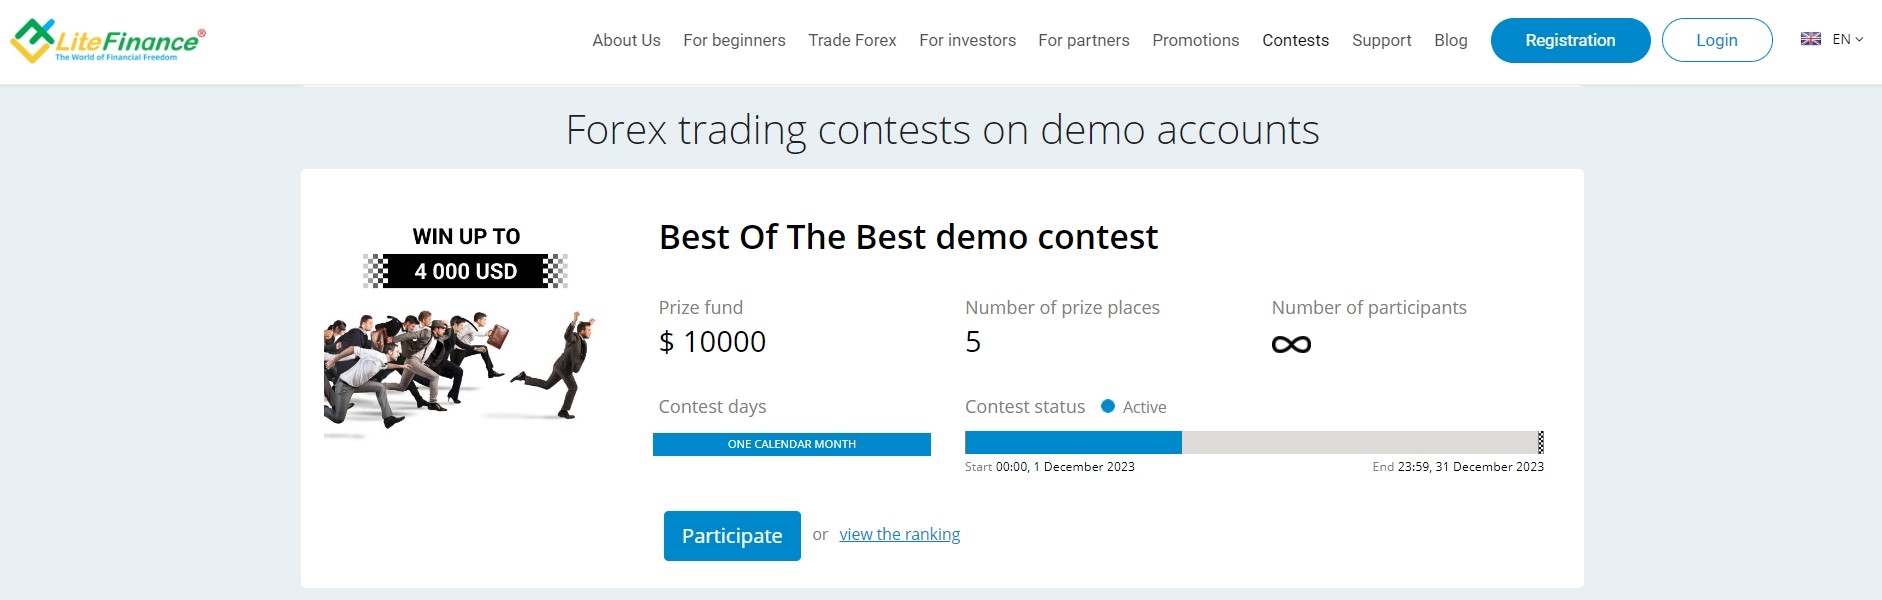 Contests on LiteFinance